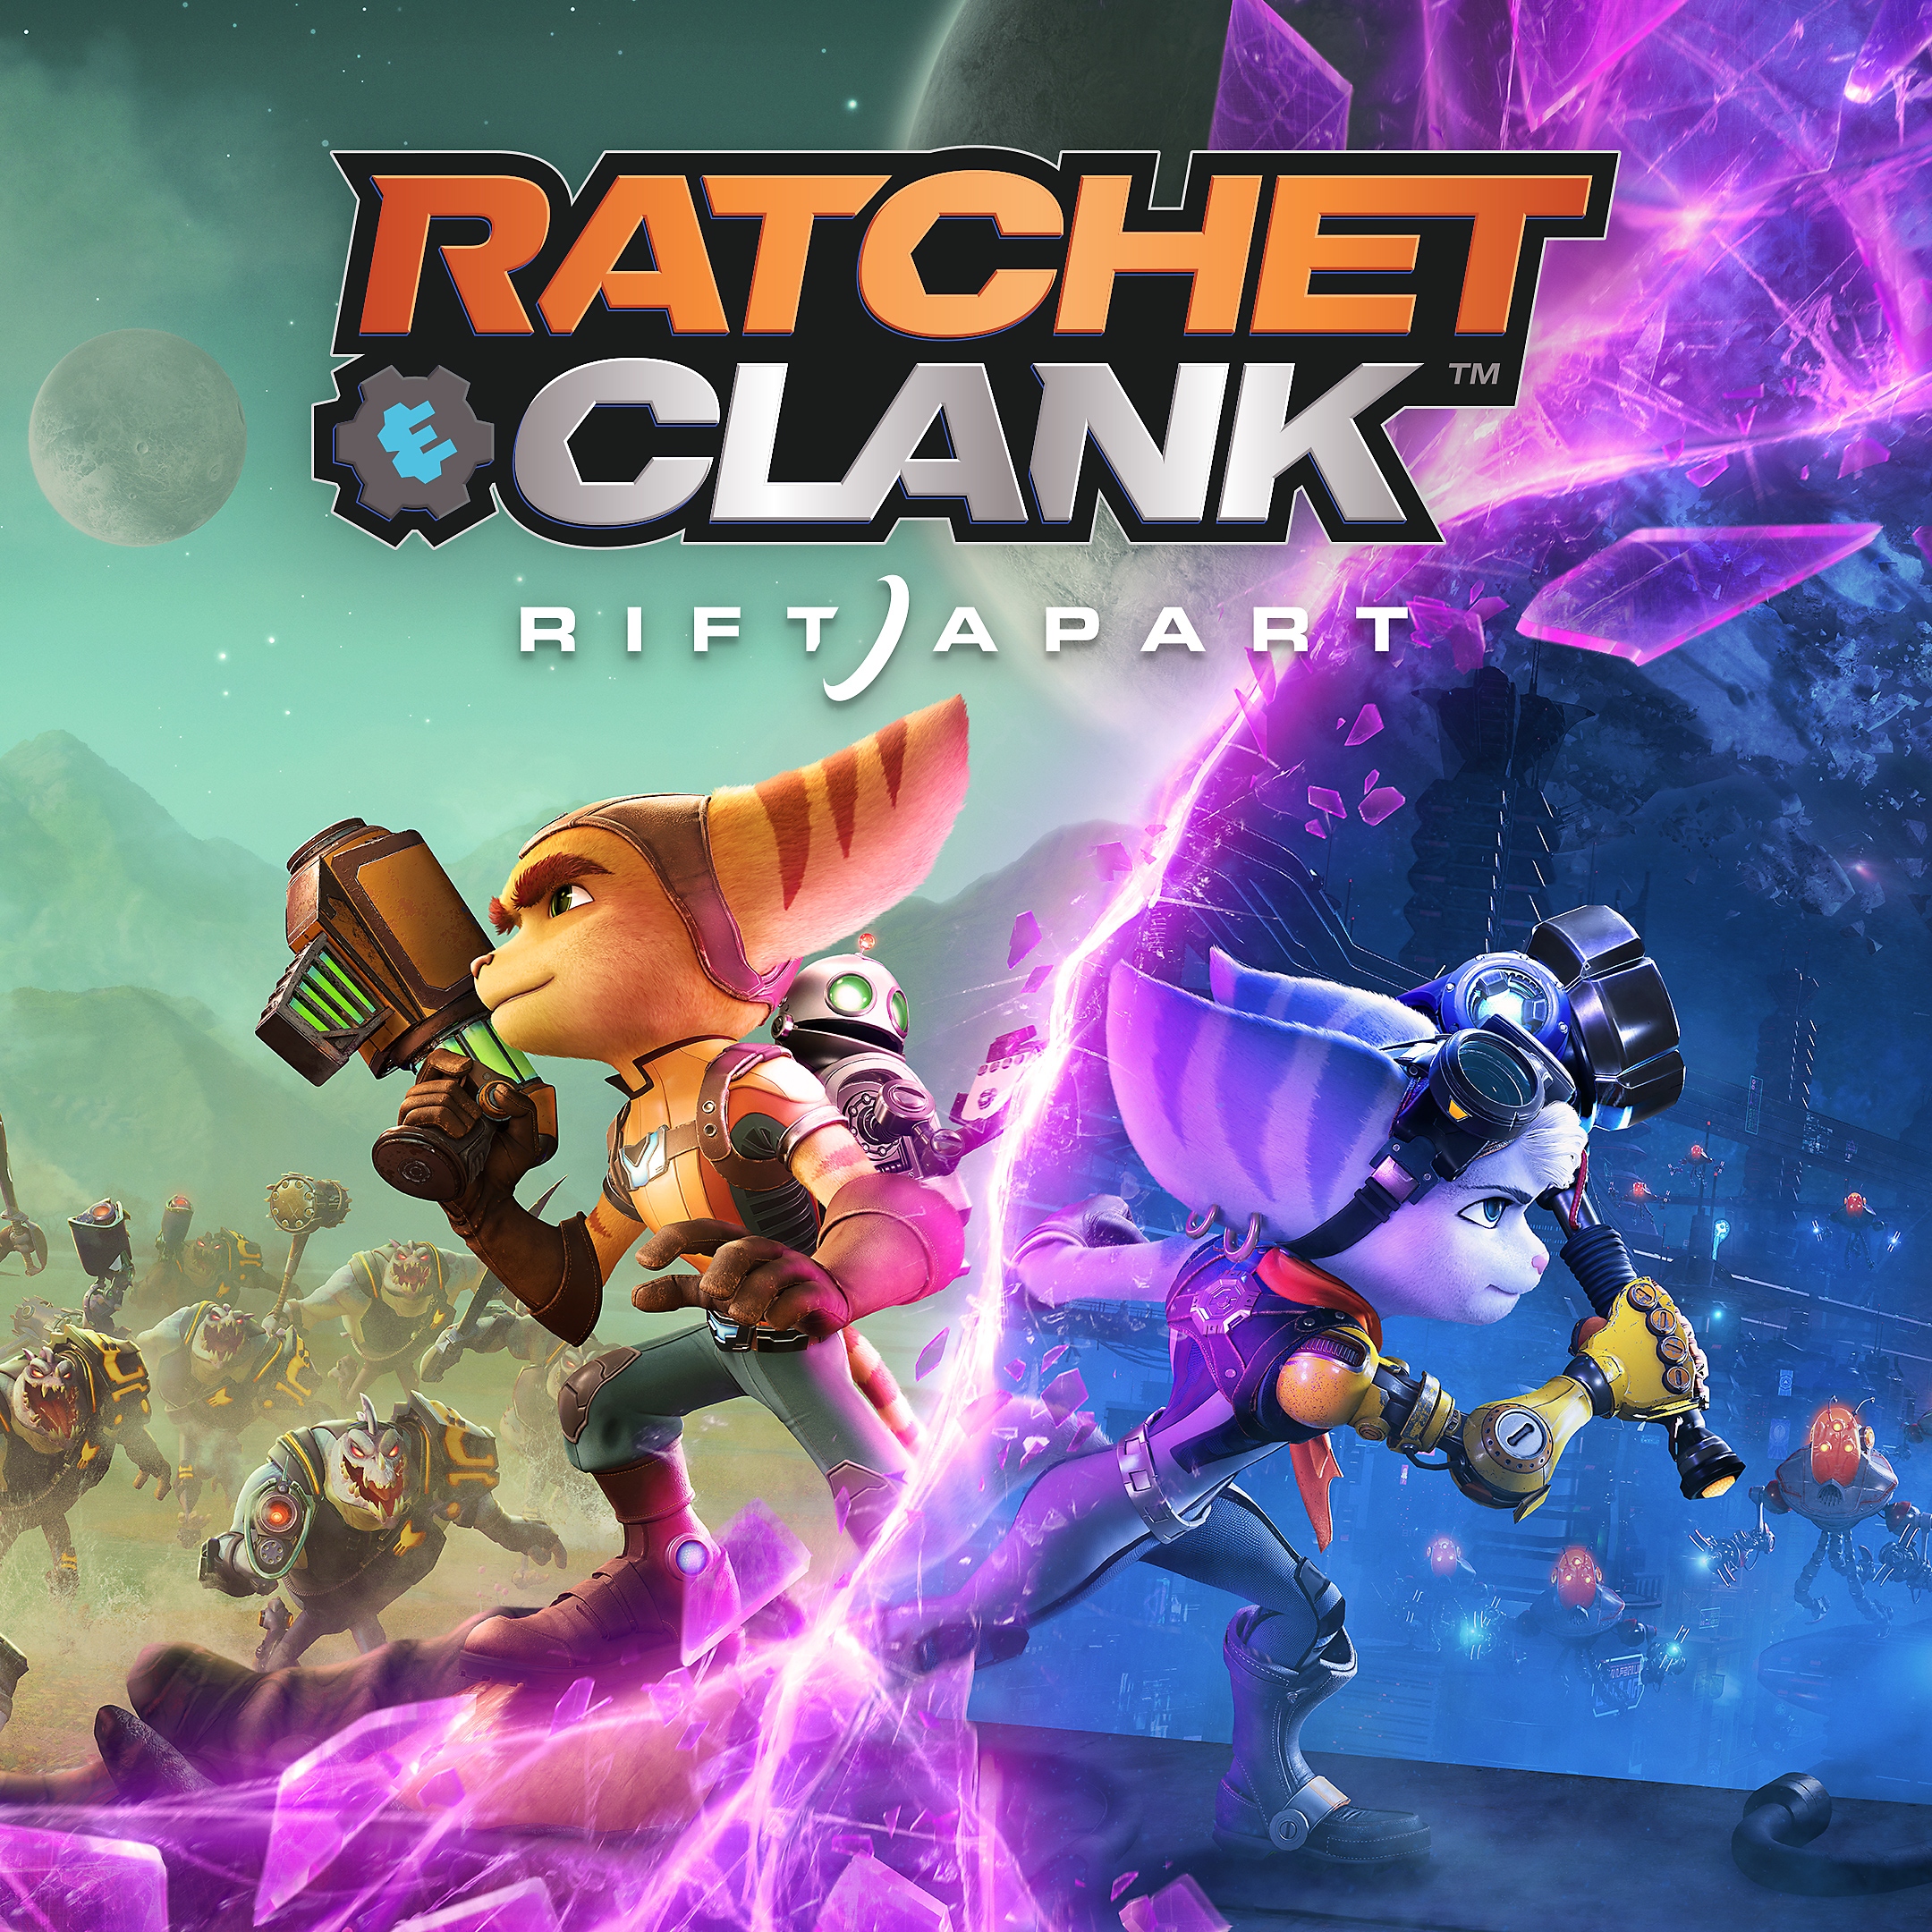 Ratchet and clank game thumbnail image